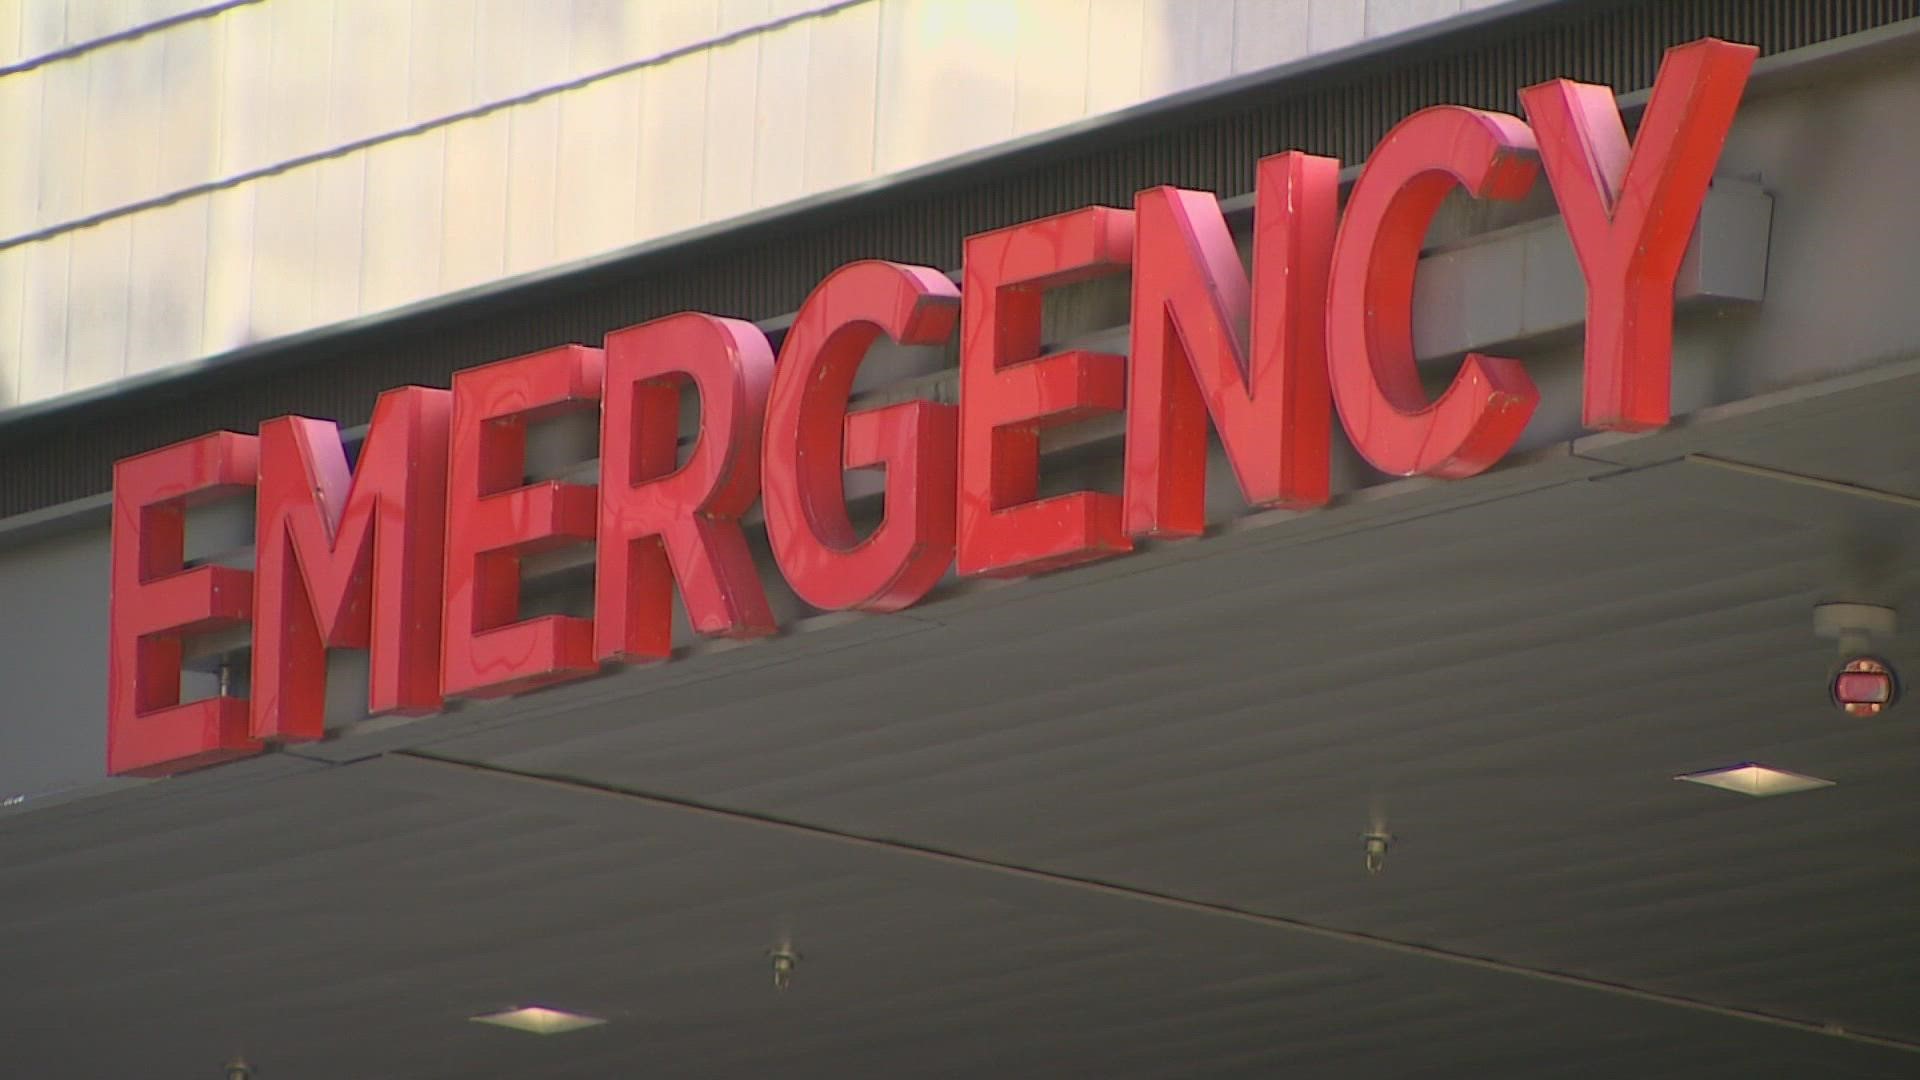 The Emergency Department at Seattle Children's Hospital said it is seeing an unprecedented number of patients.